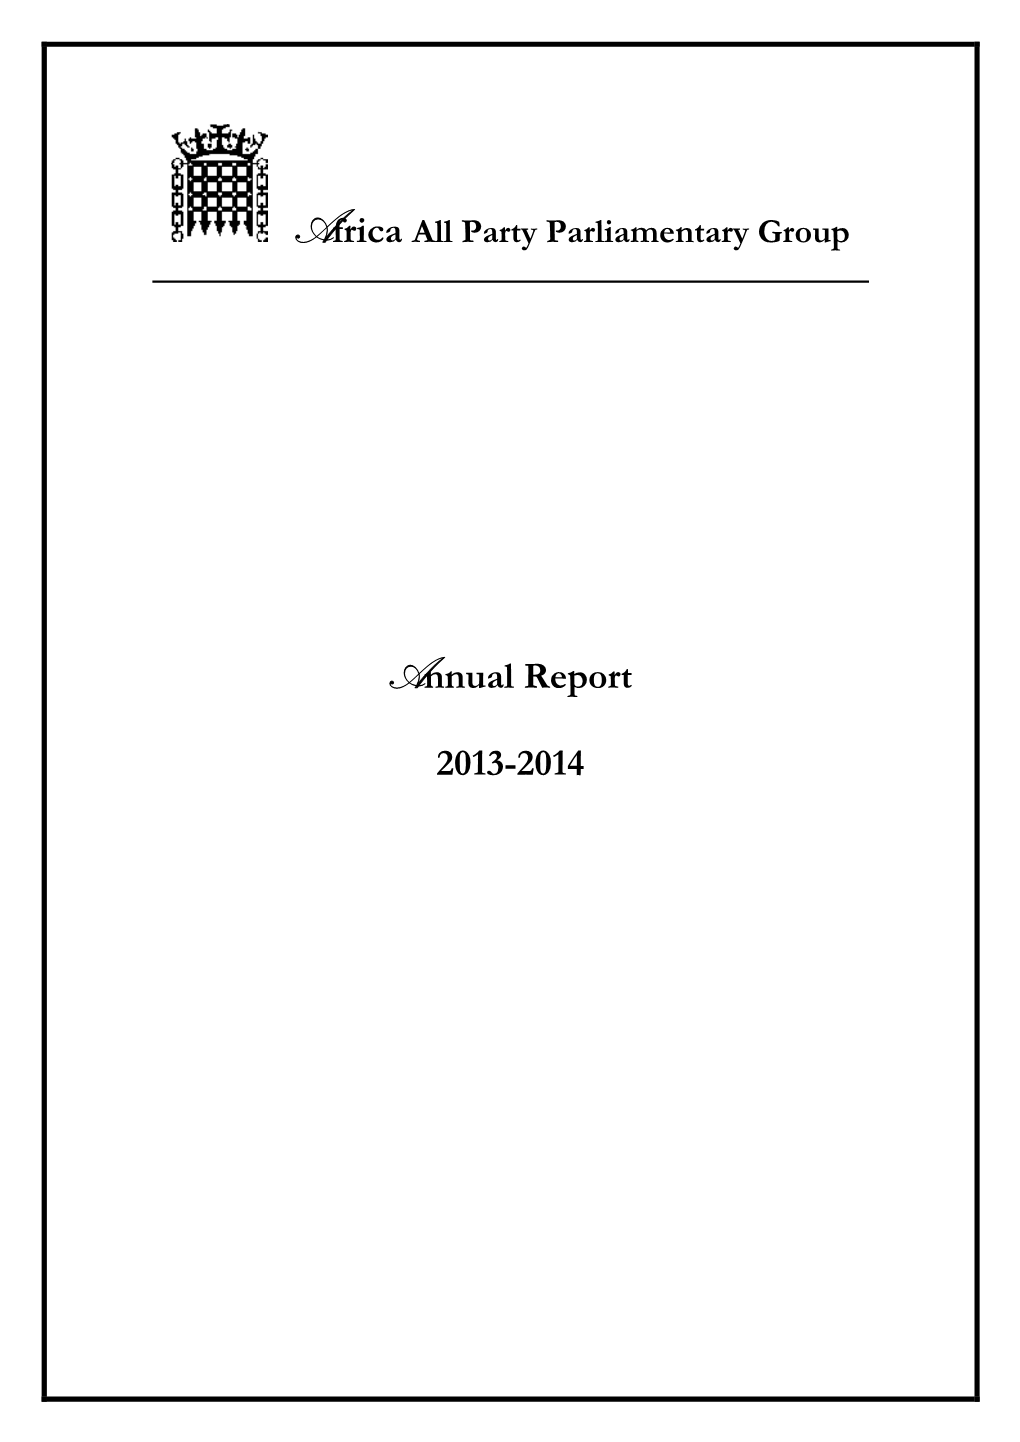 The Africa APPG Annual Report 2013-14